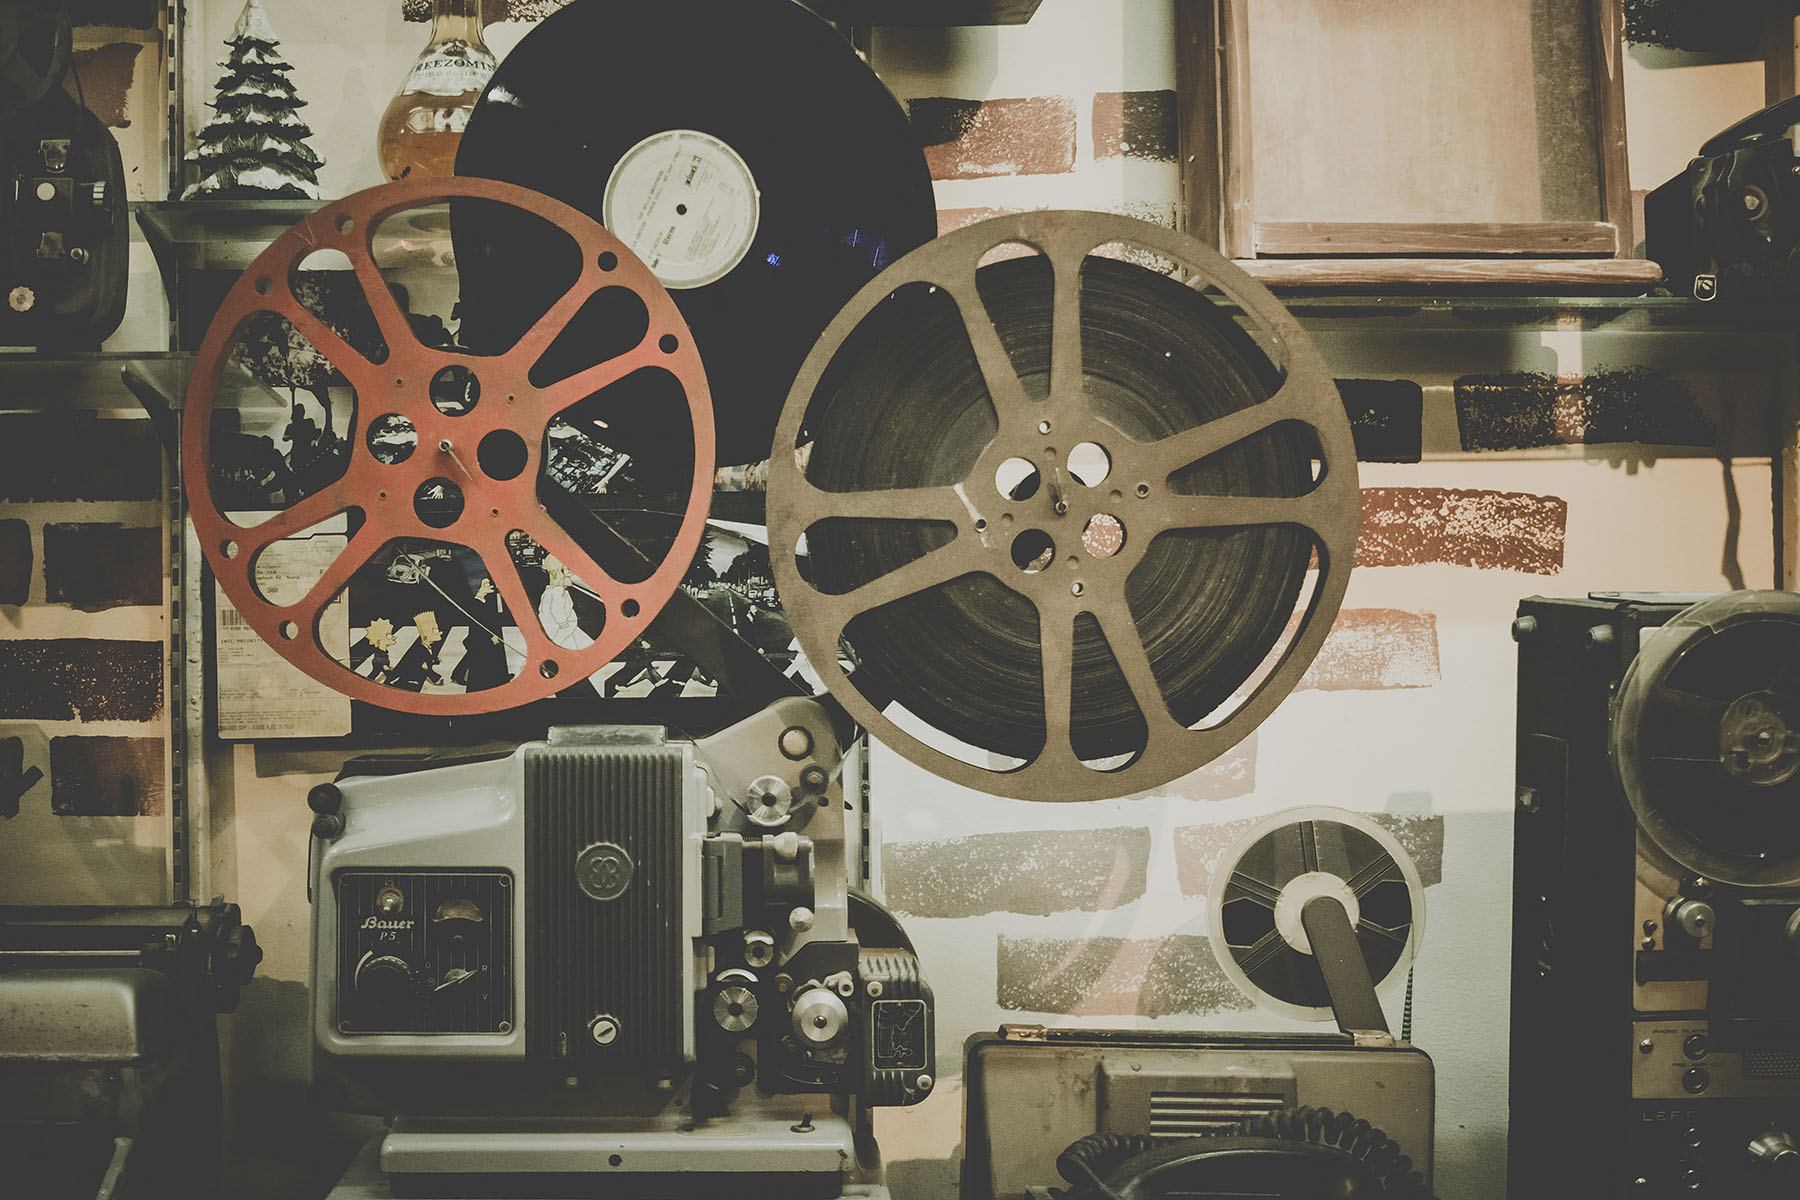 Stock photo of a film projector with multiple reels (Image by RawPixel.com)